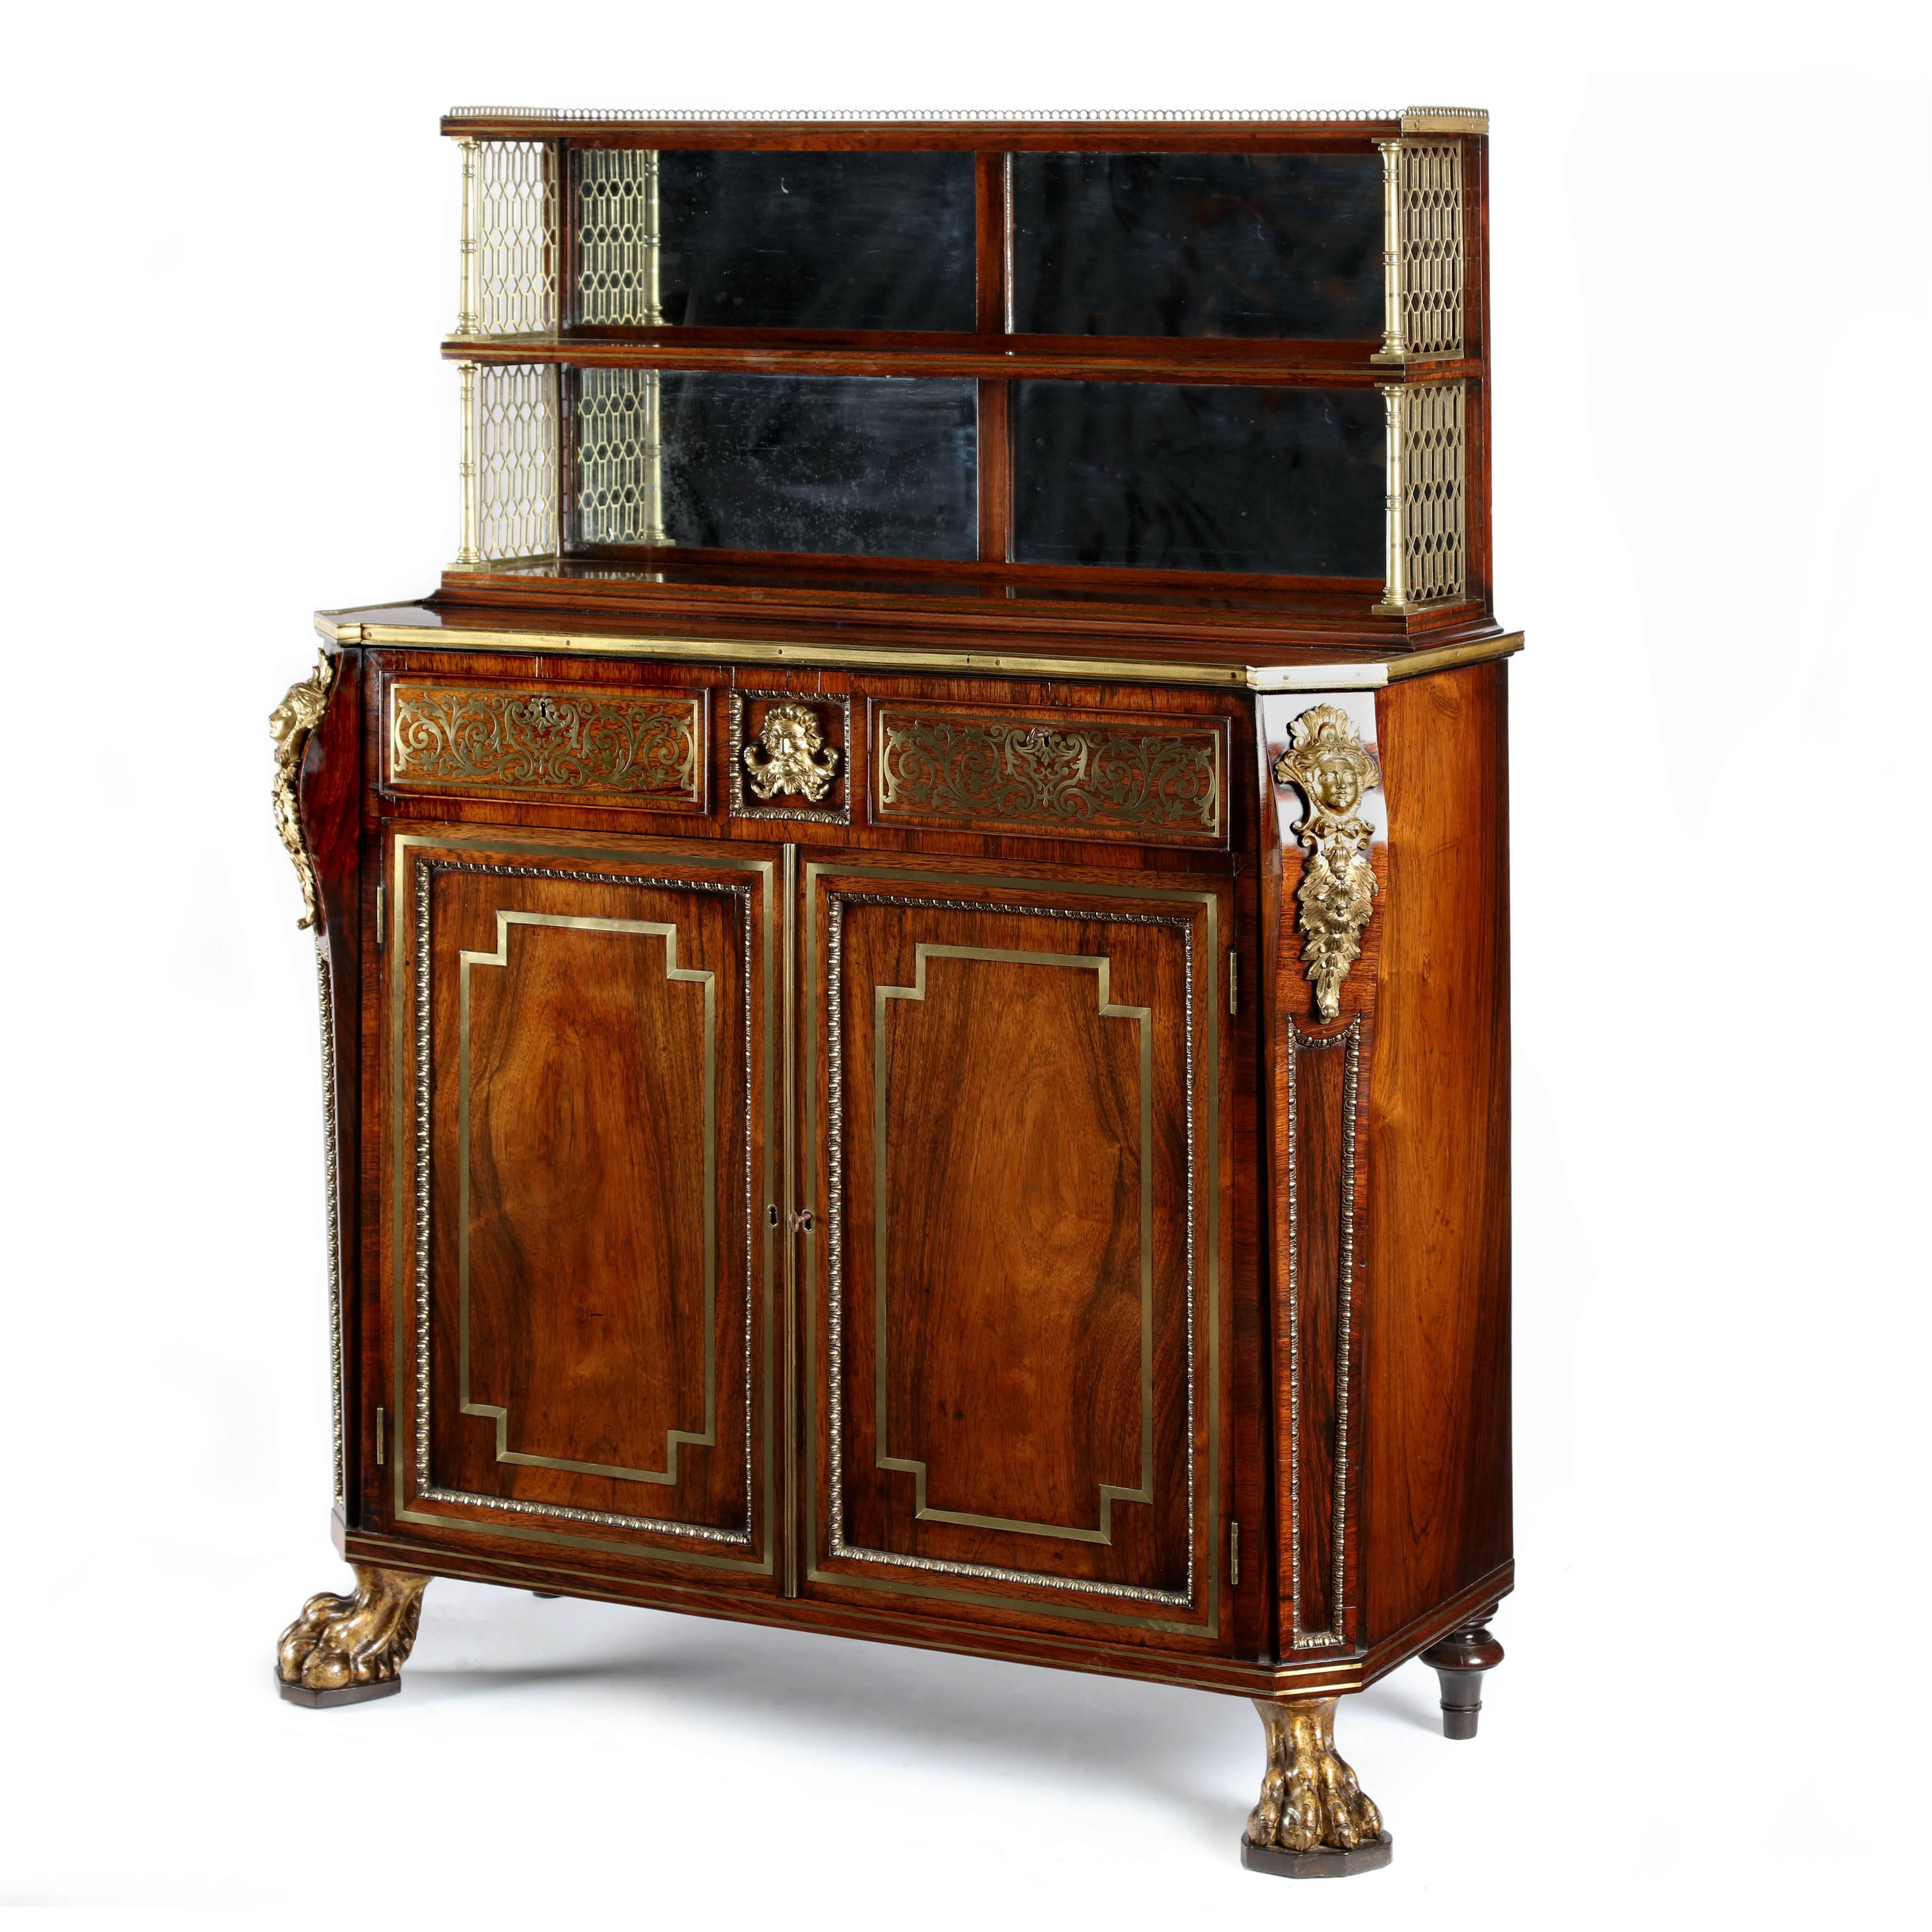 A superb pair of George III Regency period, rosewood, brass-mounted and inlaid side cabinets attributed to John Mclean. The cabinets basically of rectangular form with curved out-set front corners, with elegant brass mountings to the shoulder. The